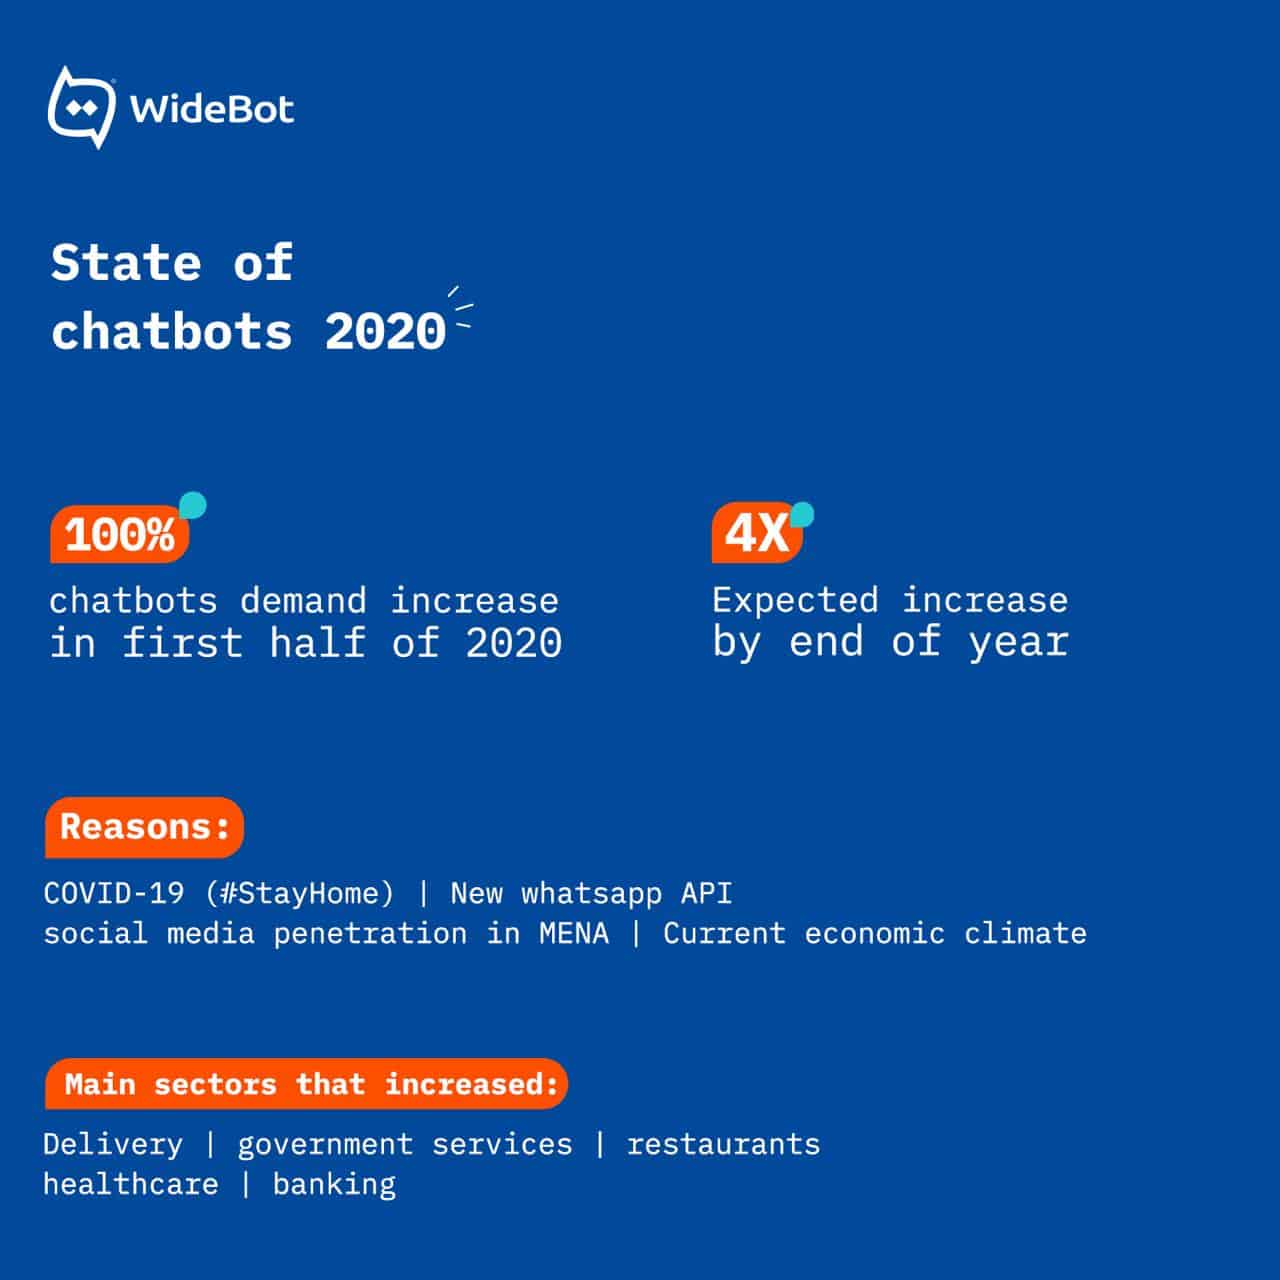 Demand for Arabic chatbots surges in H1-2020 amid COVID-19, WideBot data shows